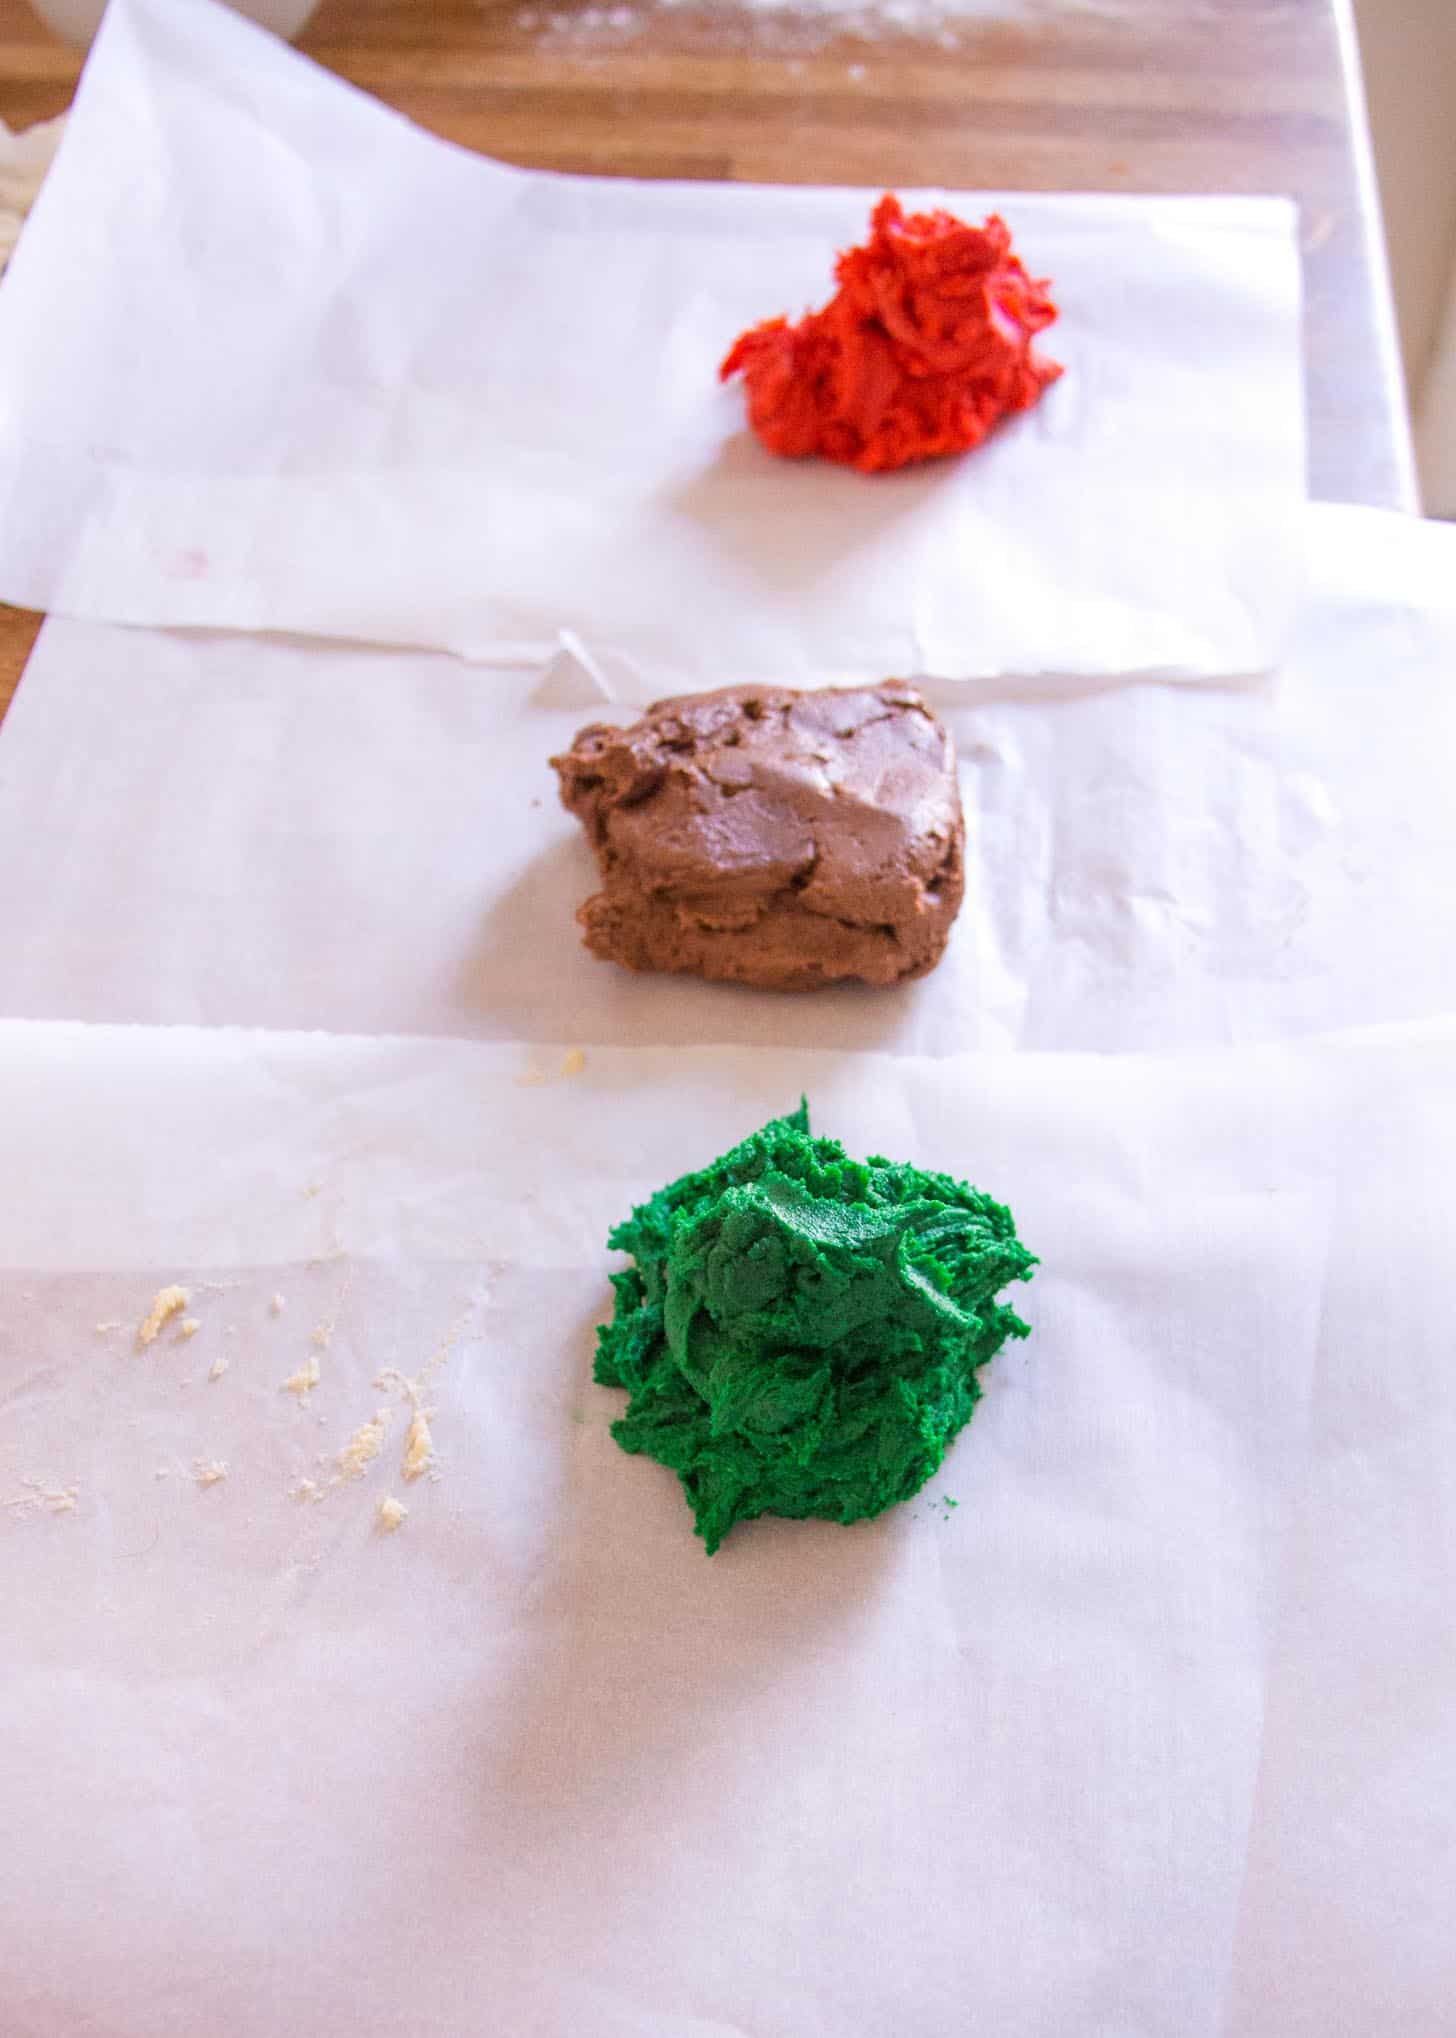 dividing and coloring dough for pinwheel cookies